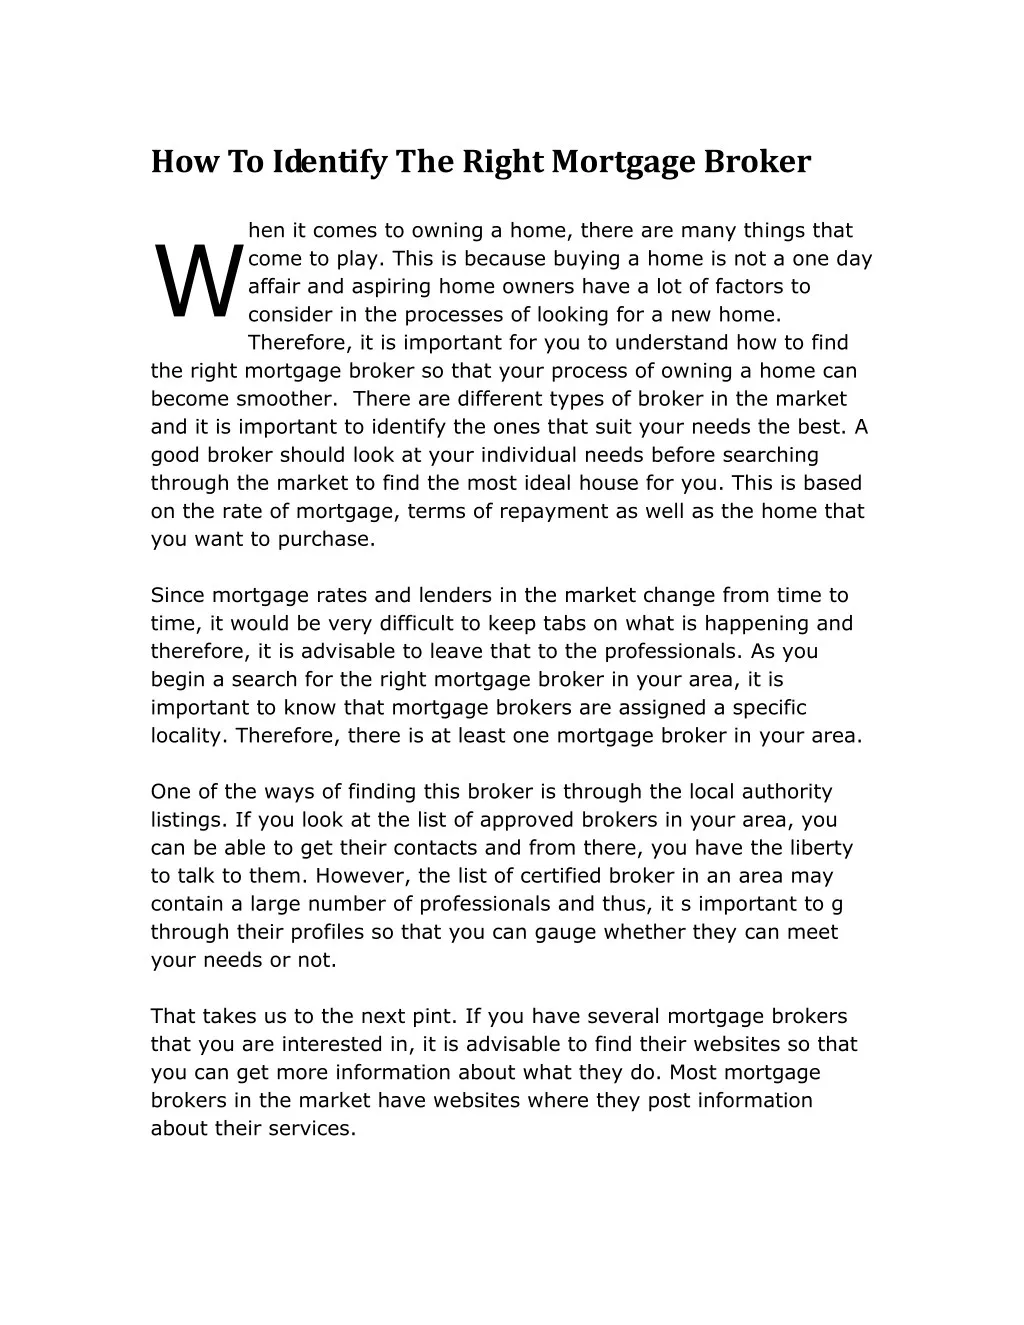 how to identify the right mortgage broker w